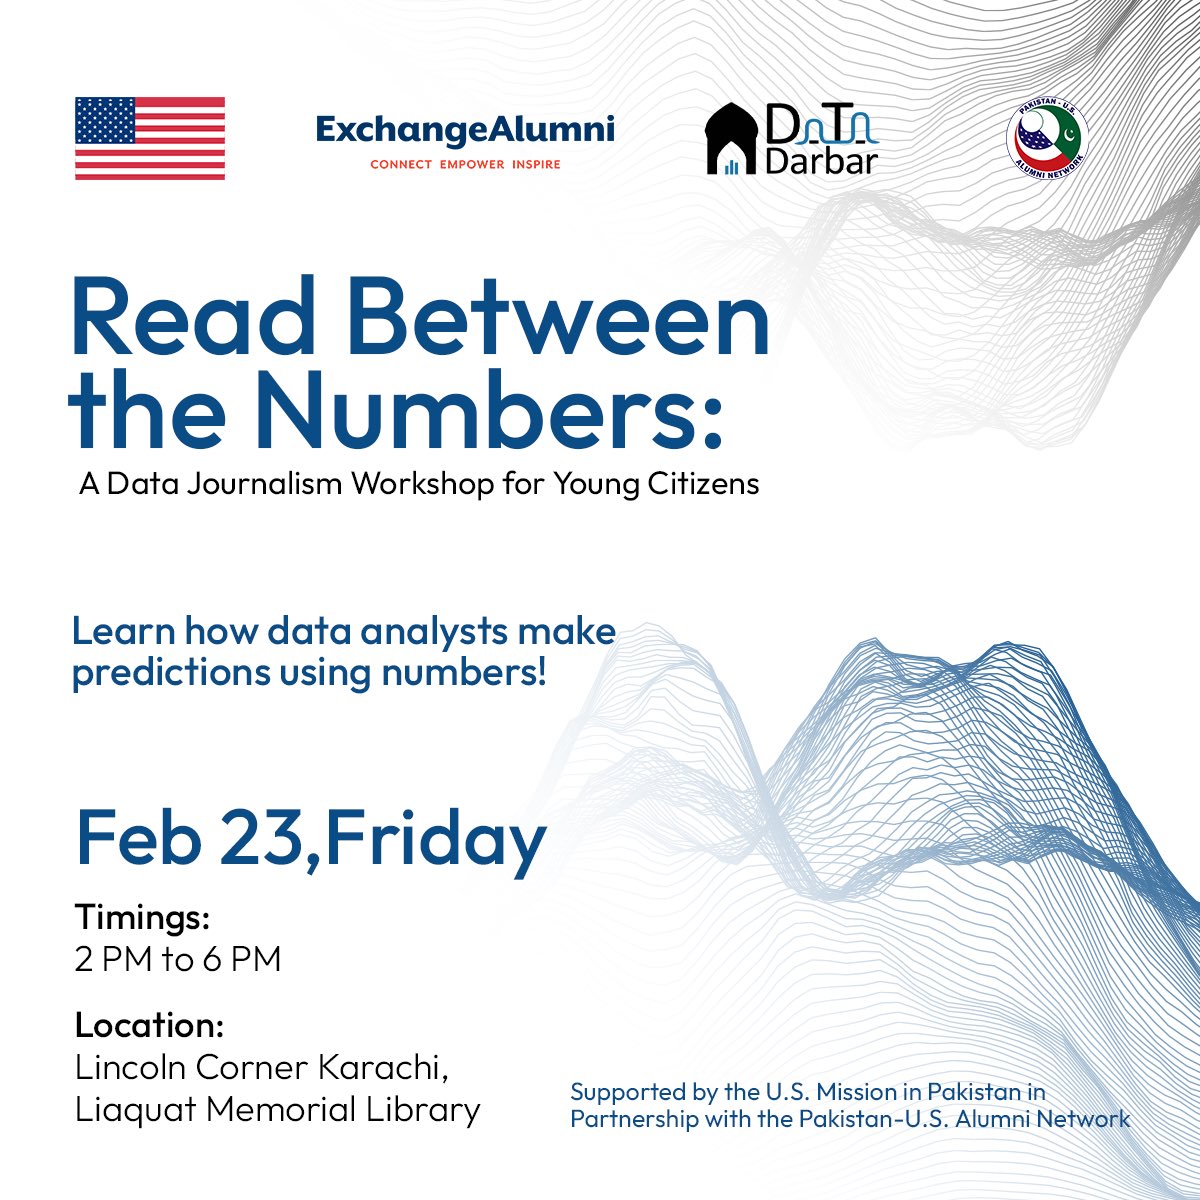 Calling all young data enthusiasts aged 14-22. Join us for our data journalism workshop supported by @usembislamabad & @PakUSAlumni. Don't miss this FREE training on Feb 23, 2-6 PM. Register now: bit.ly/RegistrationFo…